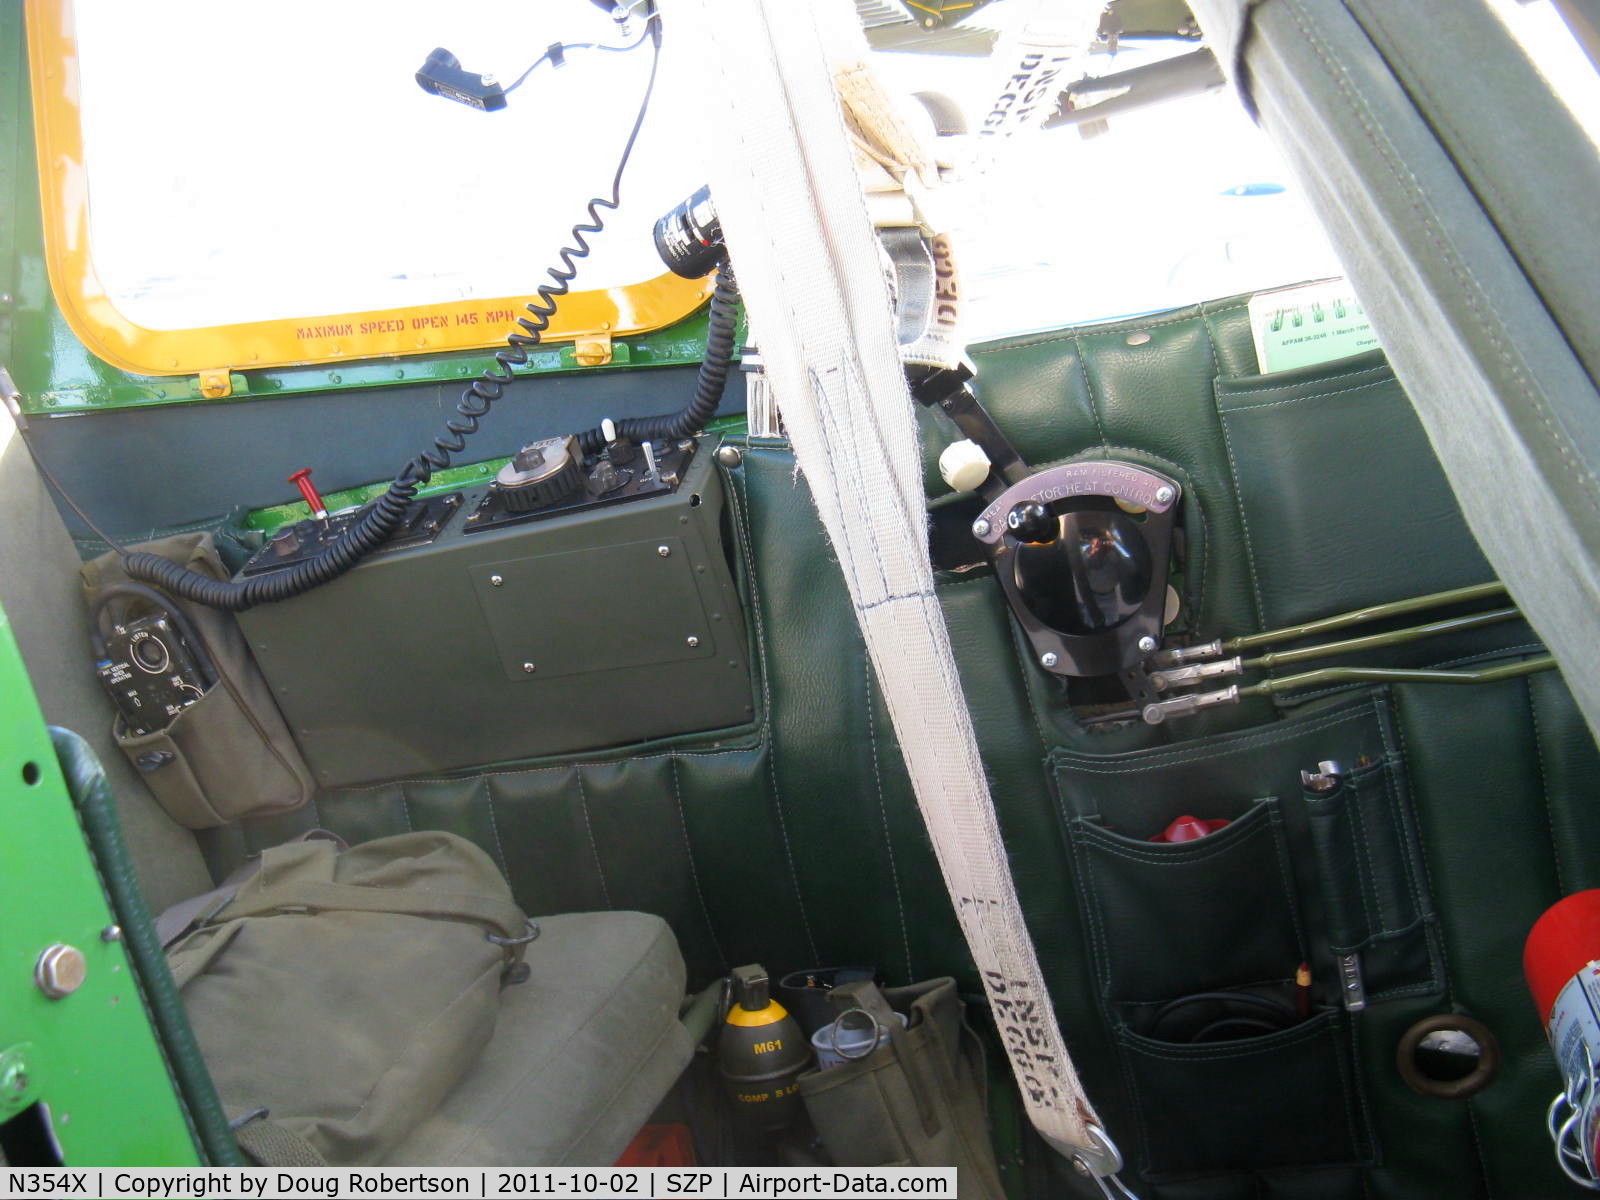 N354X, 1957 Cessna L-19E Bird Dog C/N 24512, 1957 Cessna L-19E BIRD DOG, Continental O-470-11B 213 Hp, rear seat engine controls for left hand